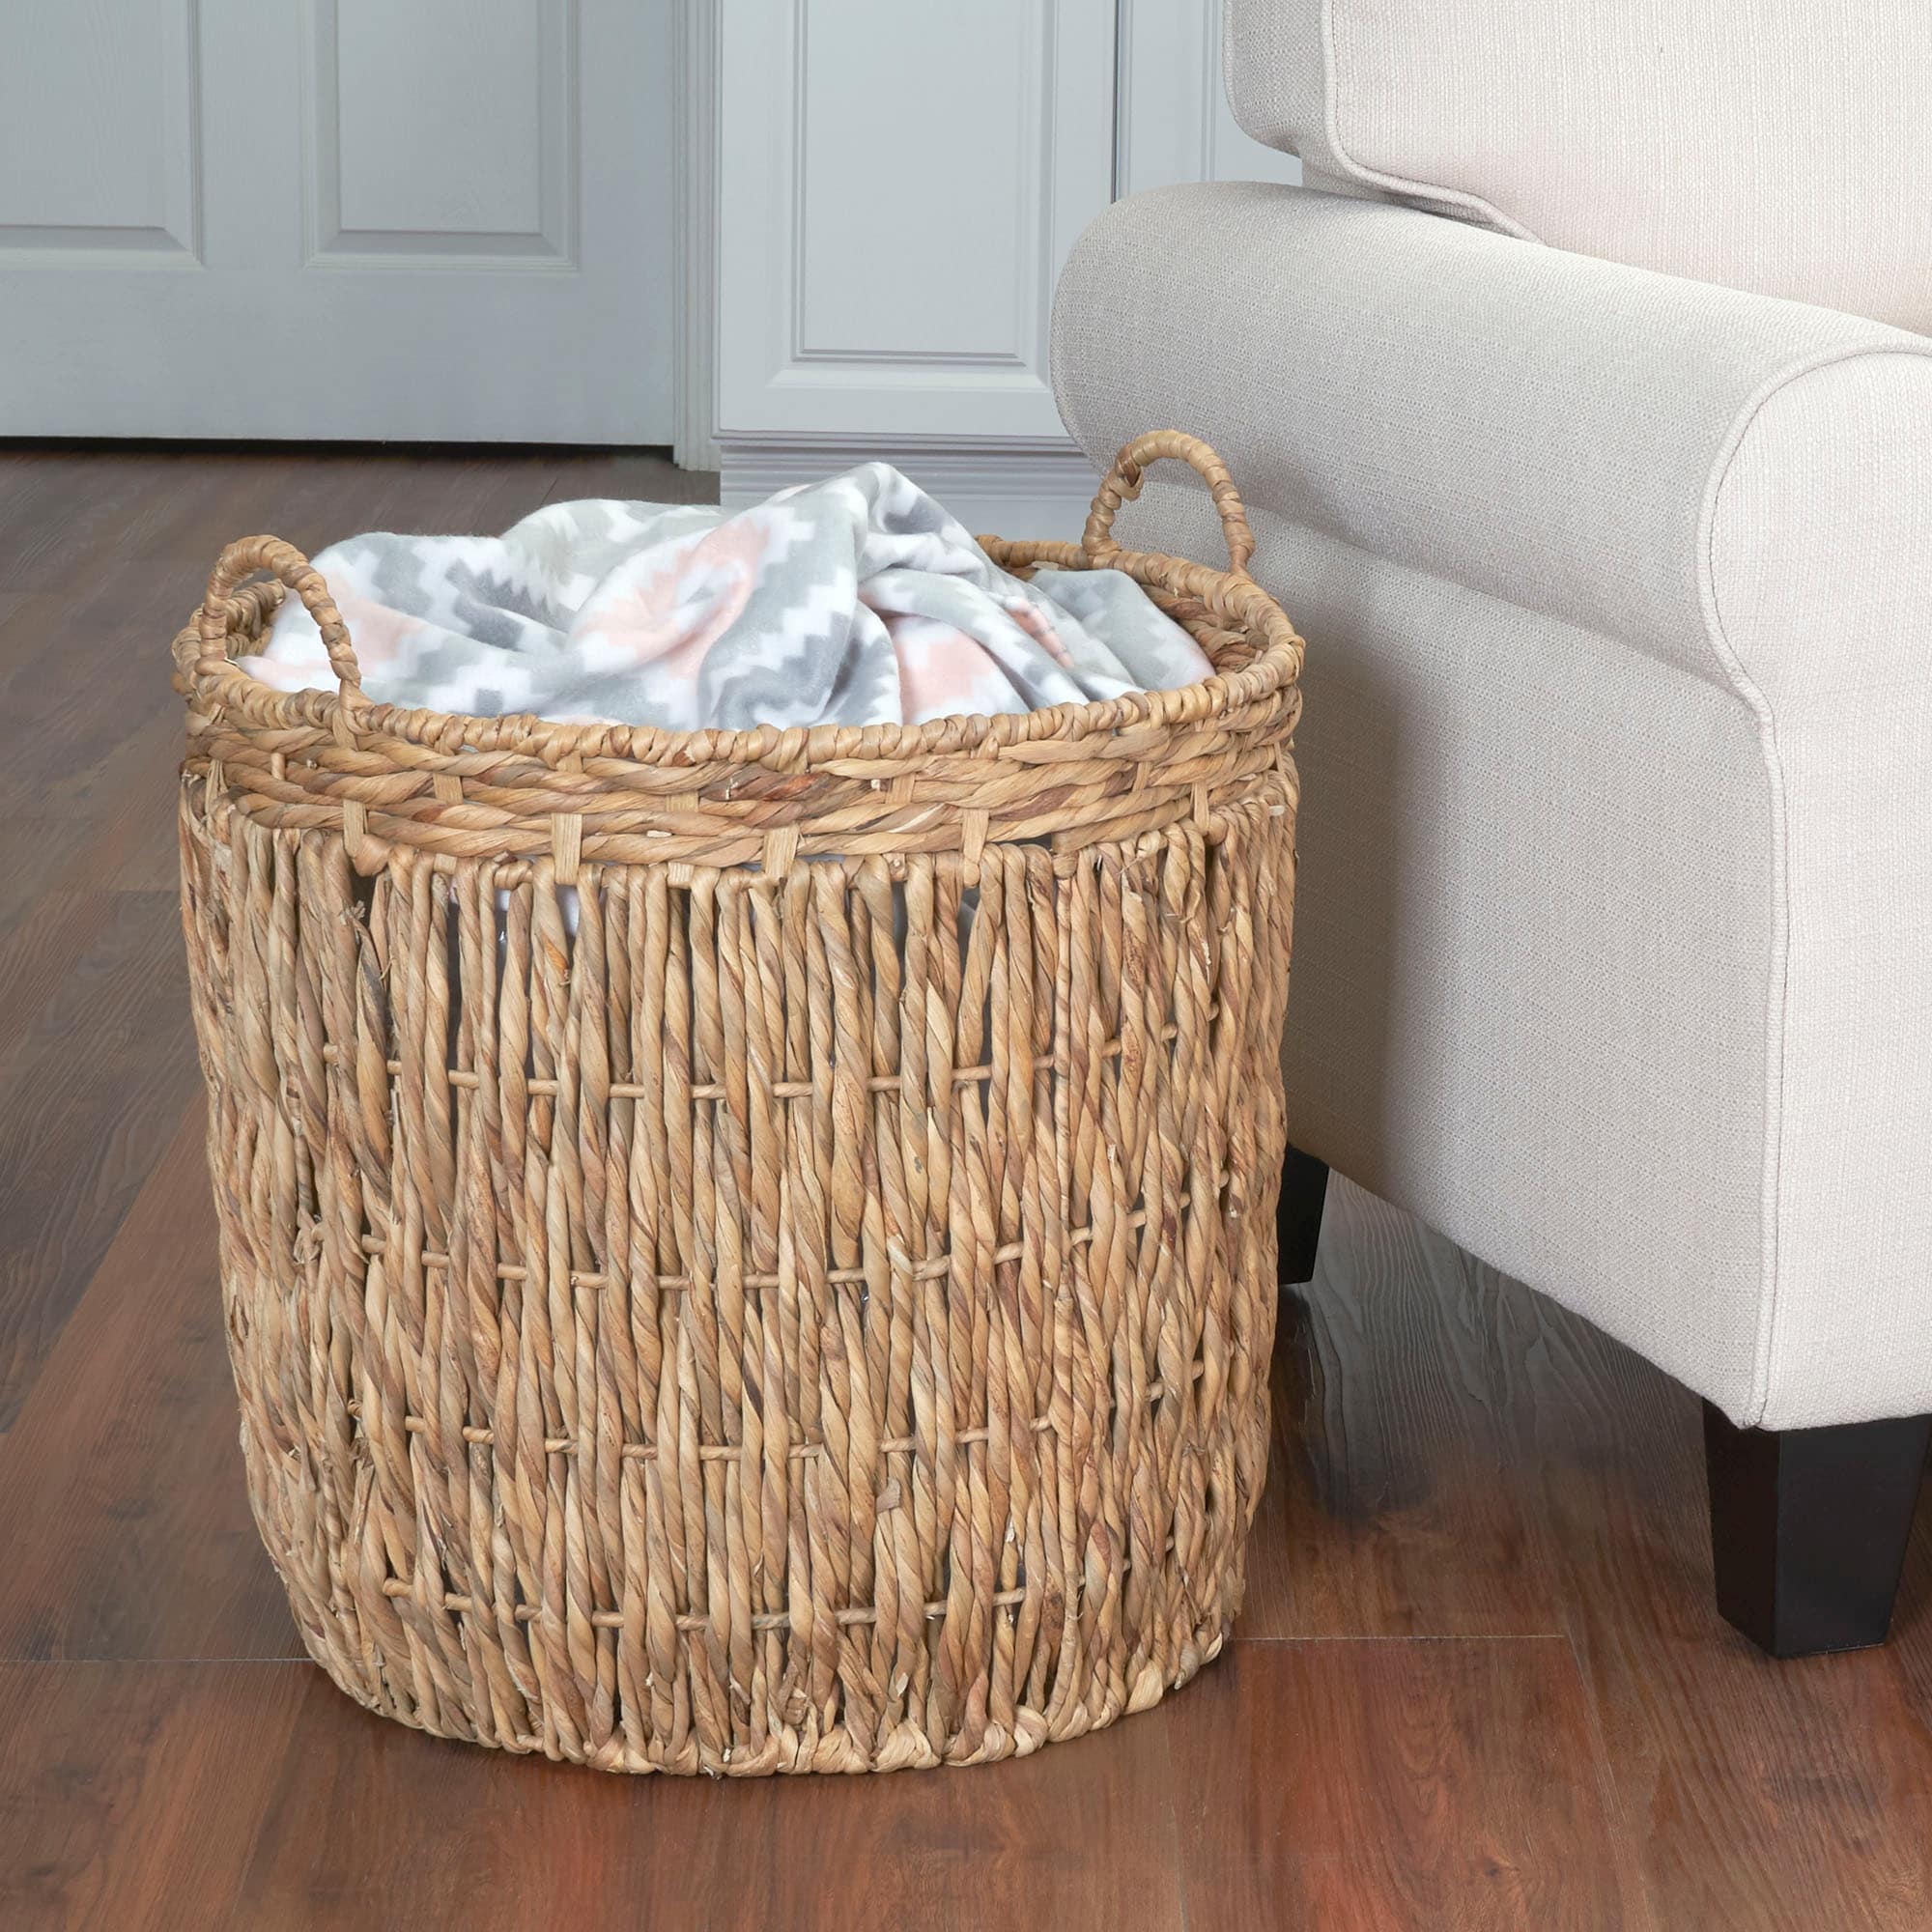 https://ak1.ostkcdn.com/images/products/is/images/direct/c2cff6034fbc83e8115bd9e020e4390c142baed1/Decorative-Woven-Wicker-Floor-Basket-with-Handles.jpg